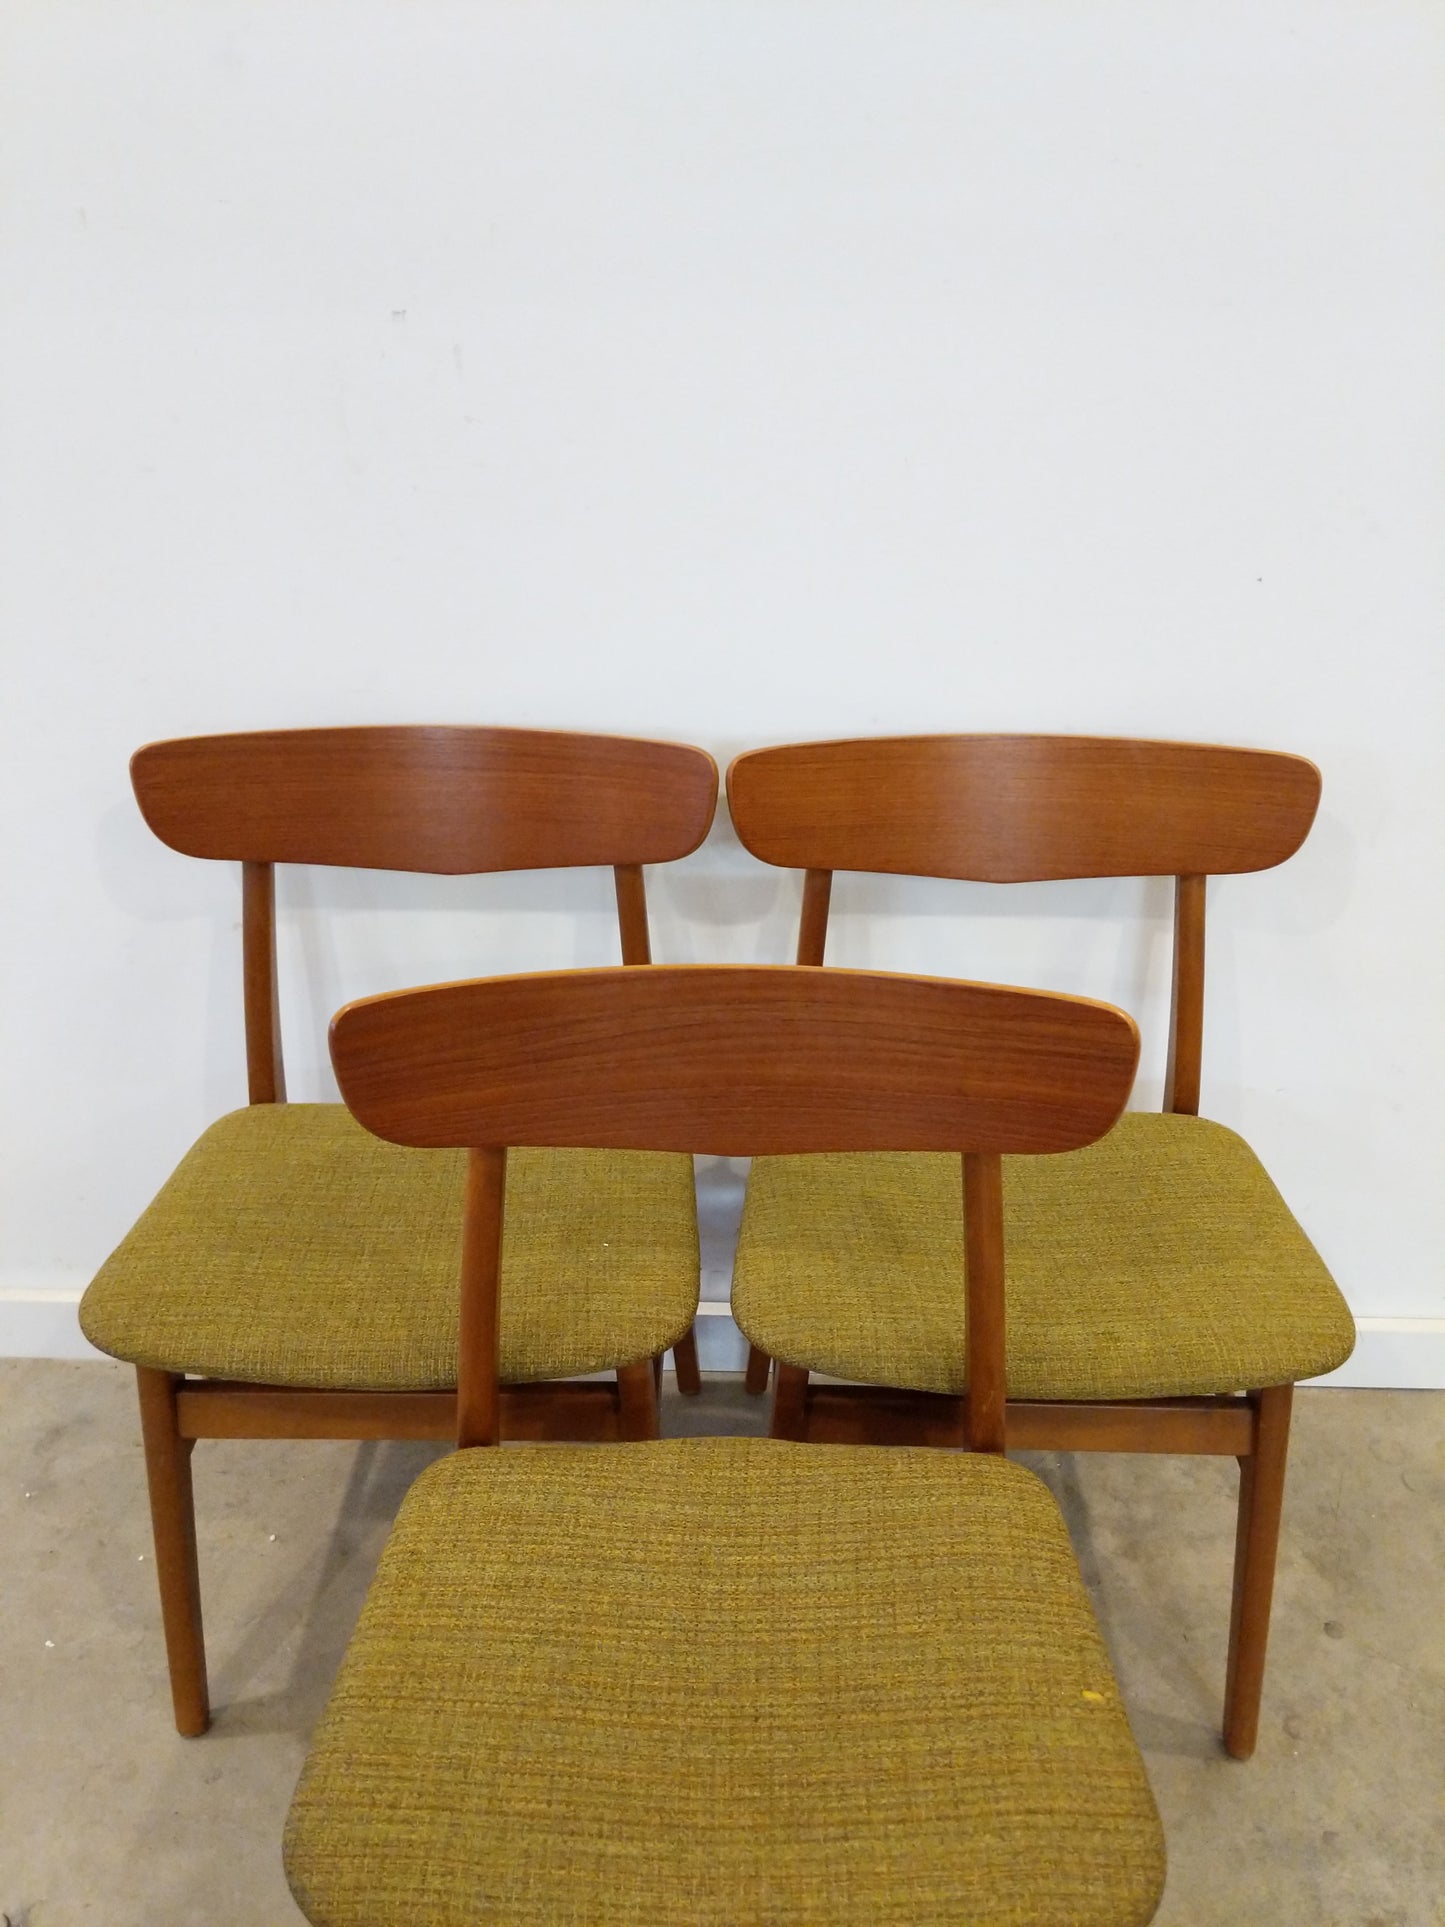 Set of 3 Vintage Danish Modern Dining Chairs